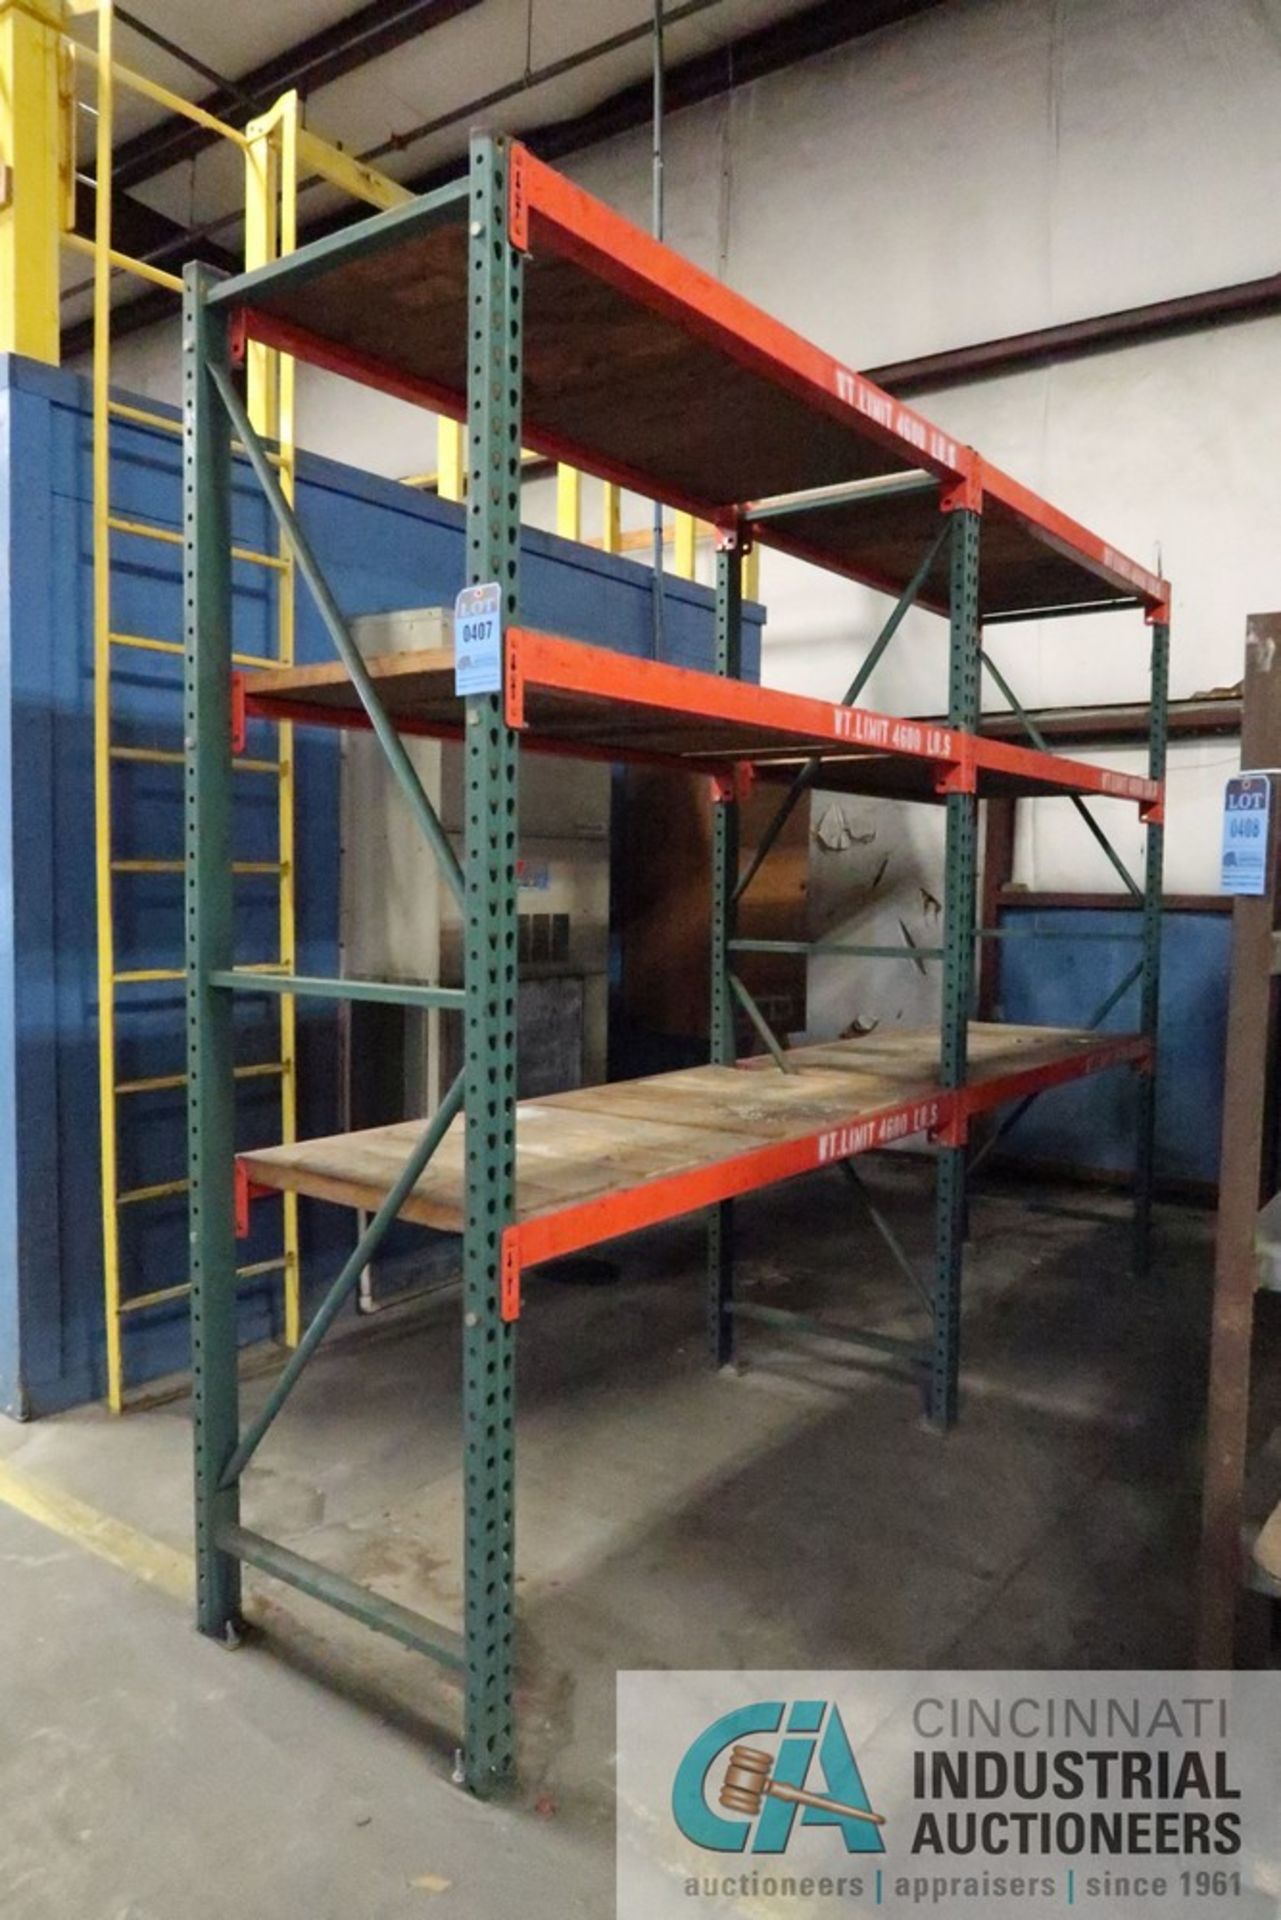 SECTIONS 66" X 30" X 100" ADJUSTABLE BEAM PALLET RACKS, WITH (3) 100" X 30" UPRIGHTS WITH 3" X 1-1/